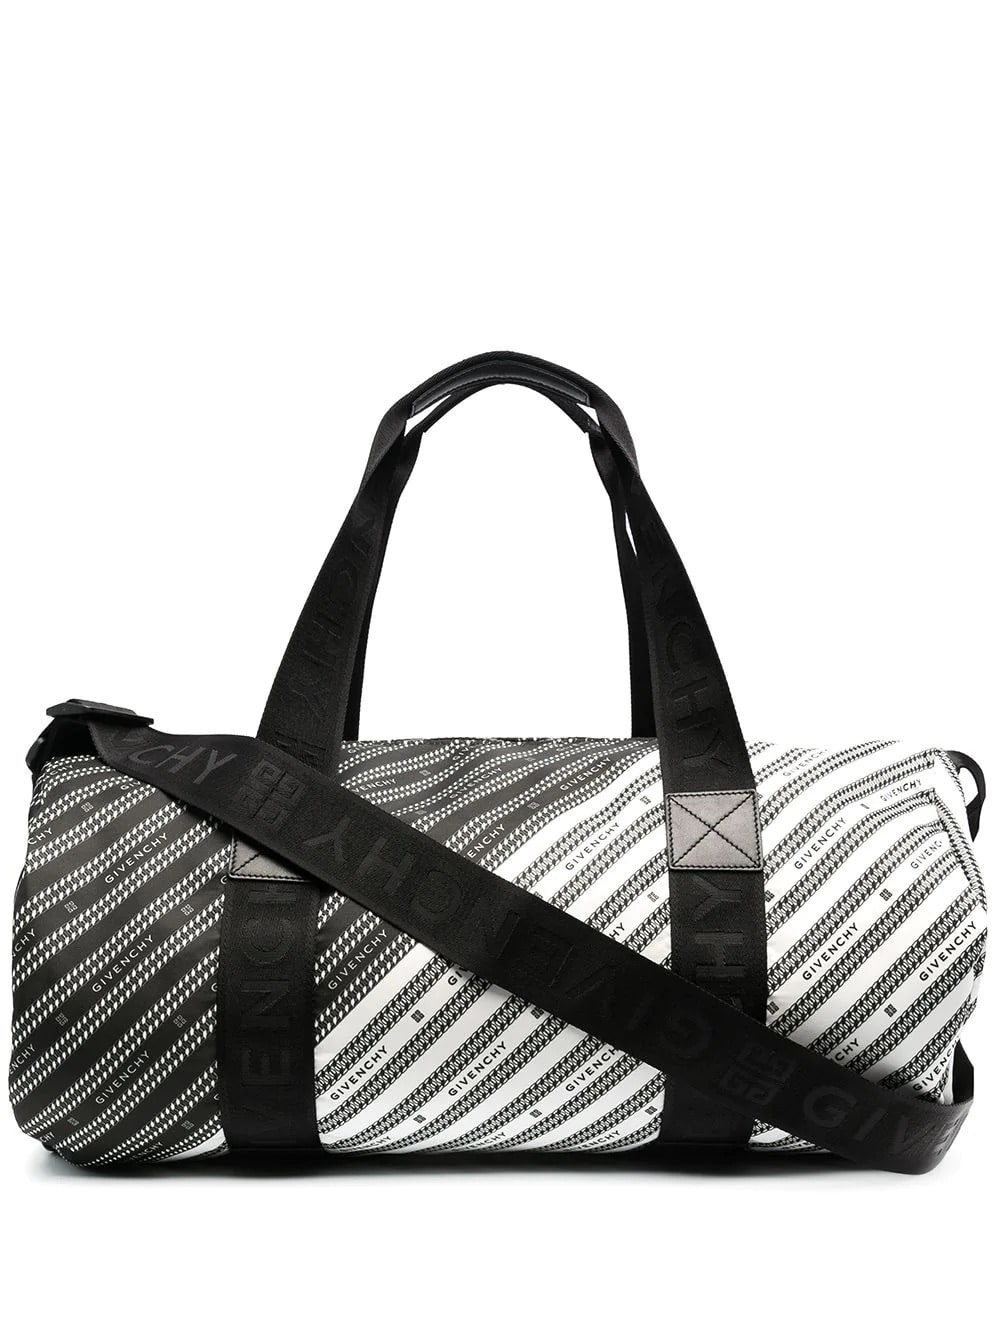 Black And White Givenchy Light 3 Duffel Bag